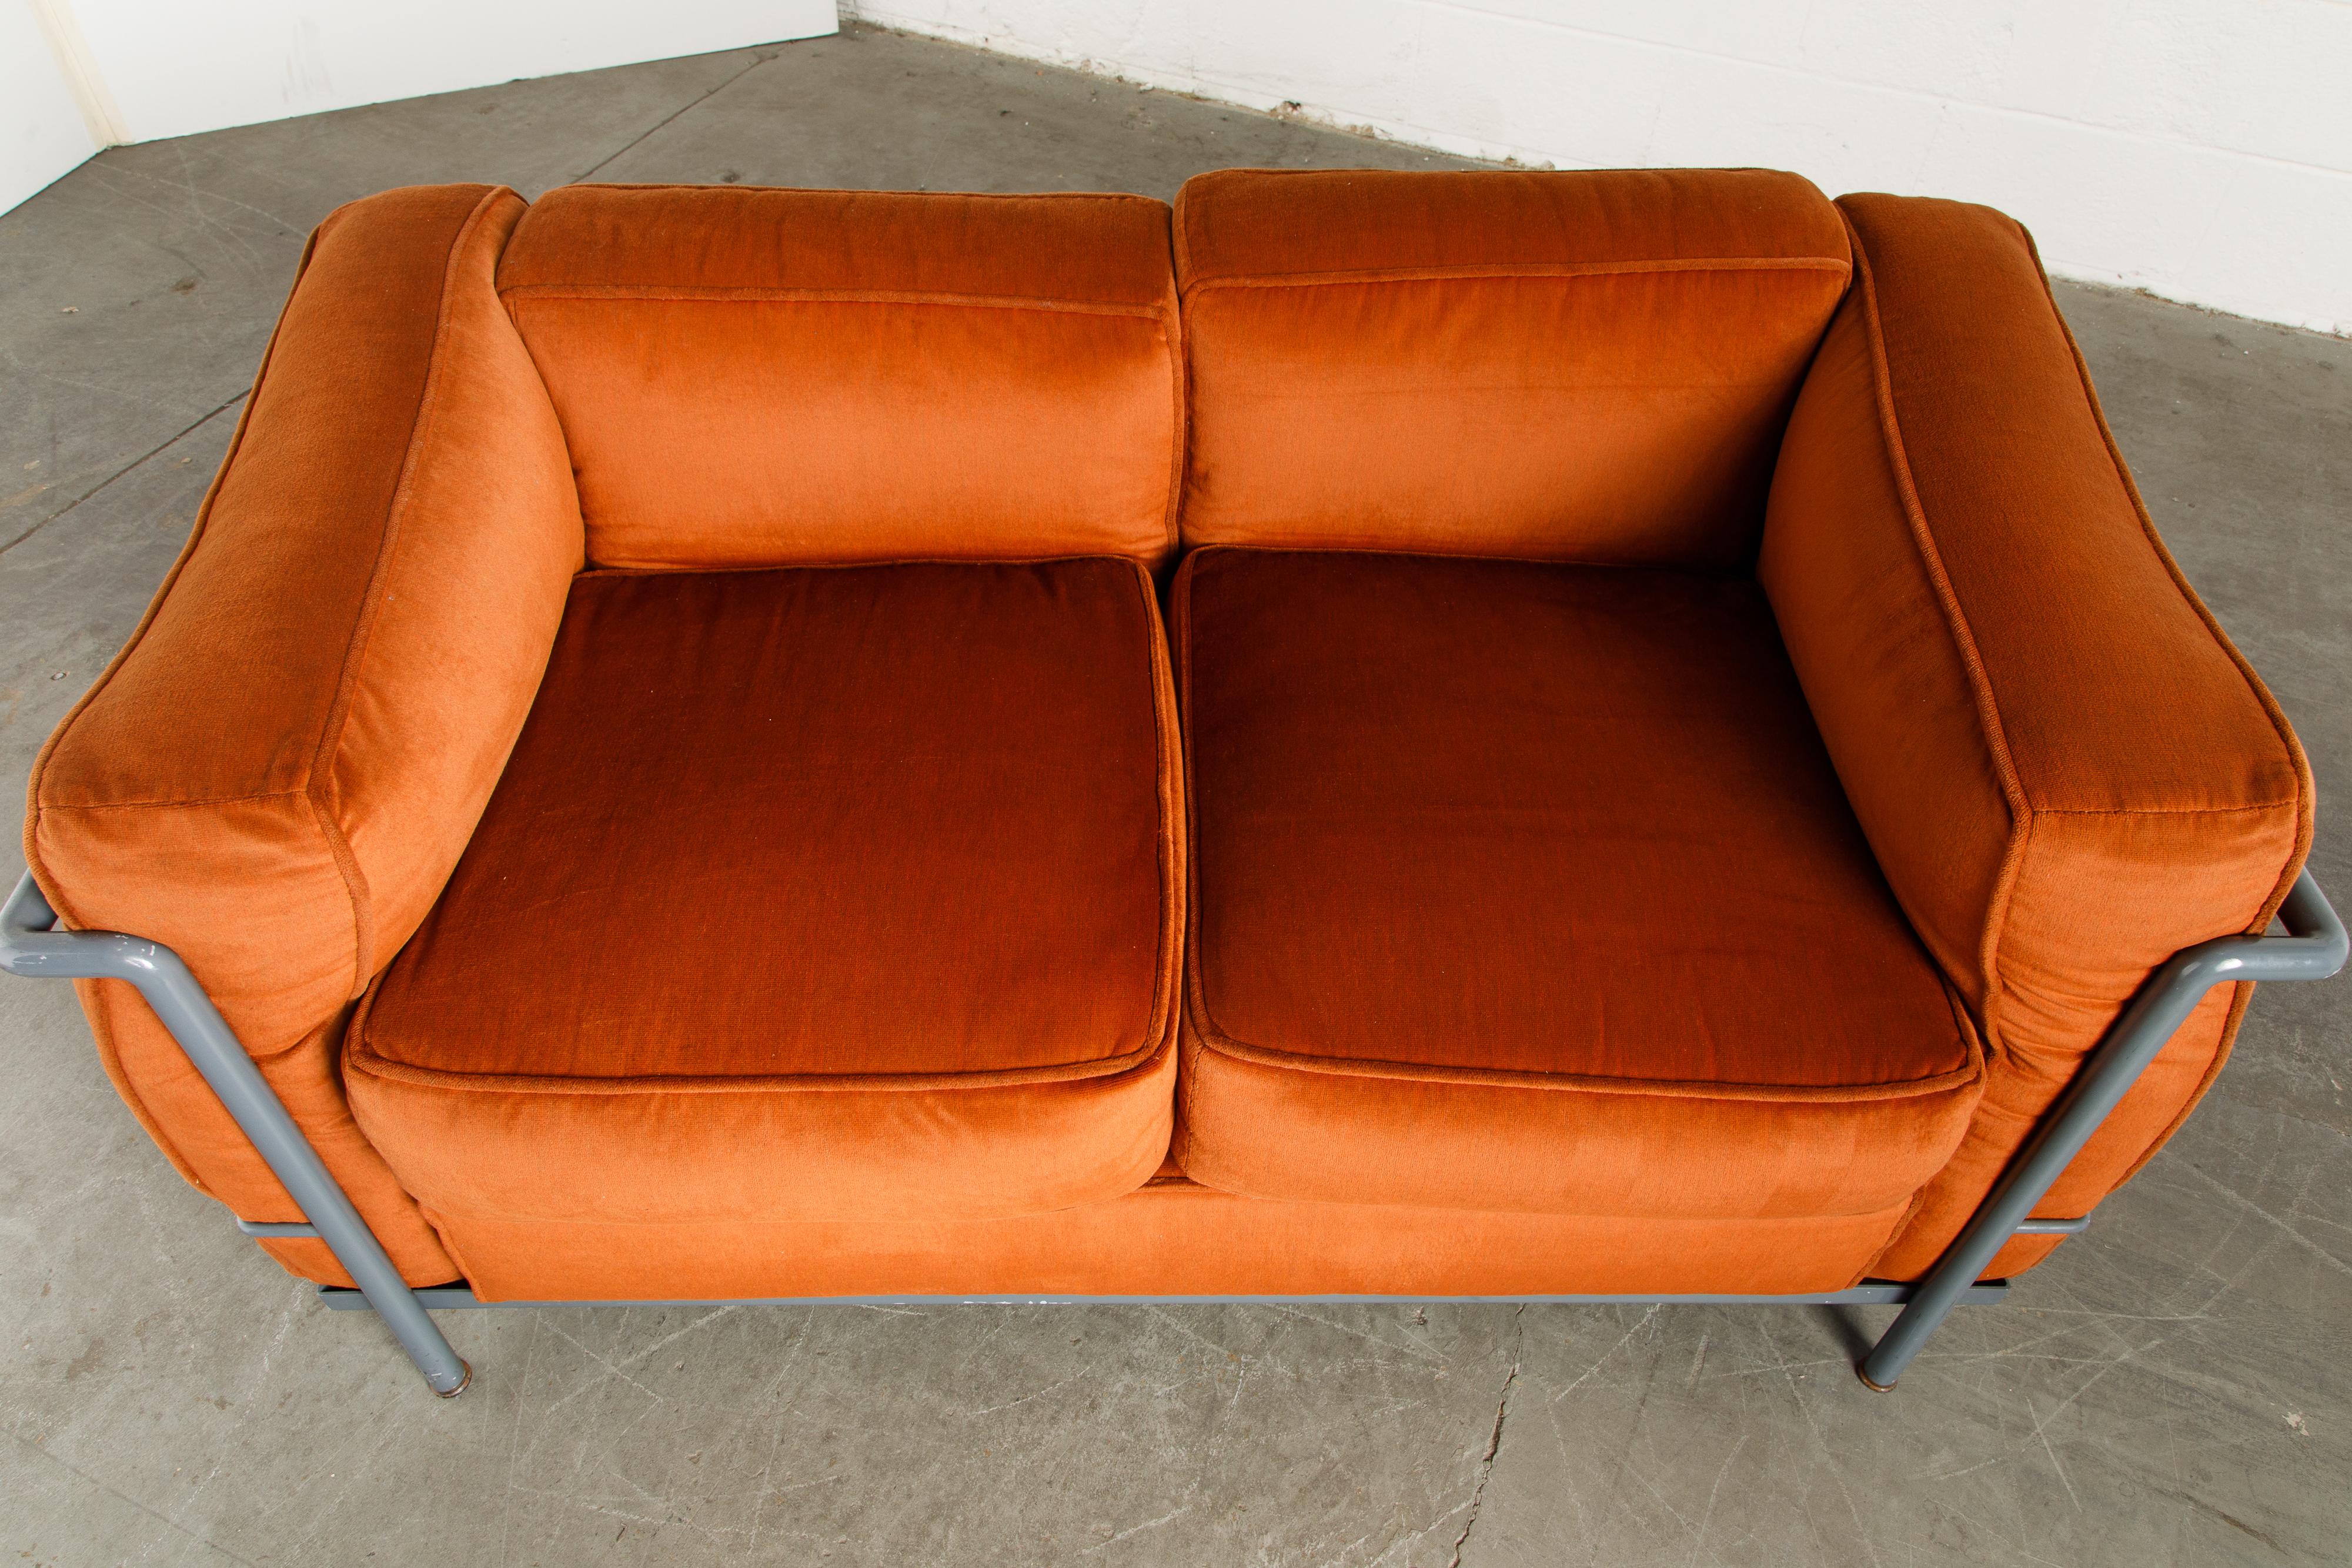 Early Production LC2 Loveseat Sofa by Le Corbusier for Cassina, c. 1965, Signed 3